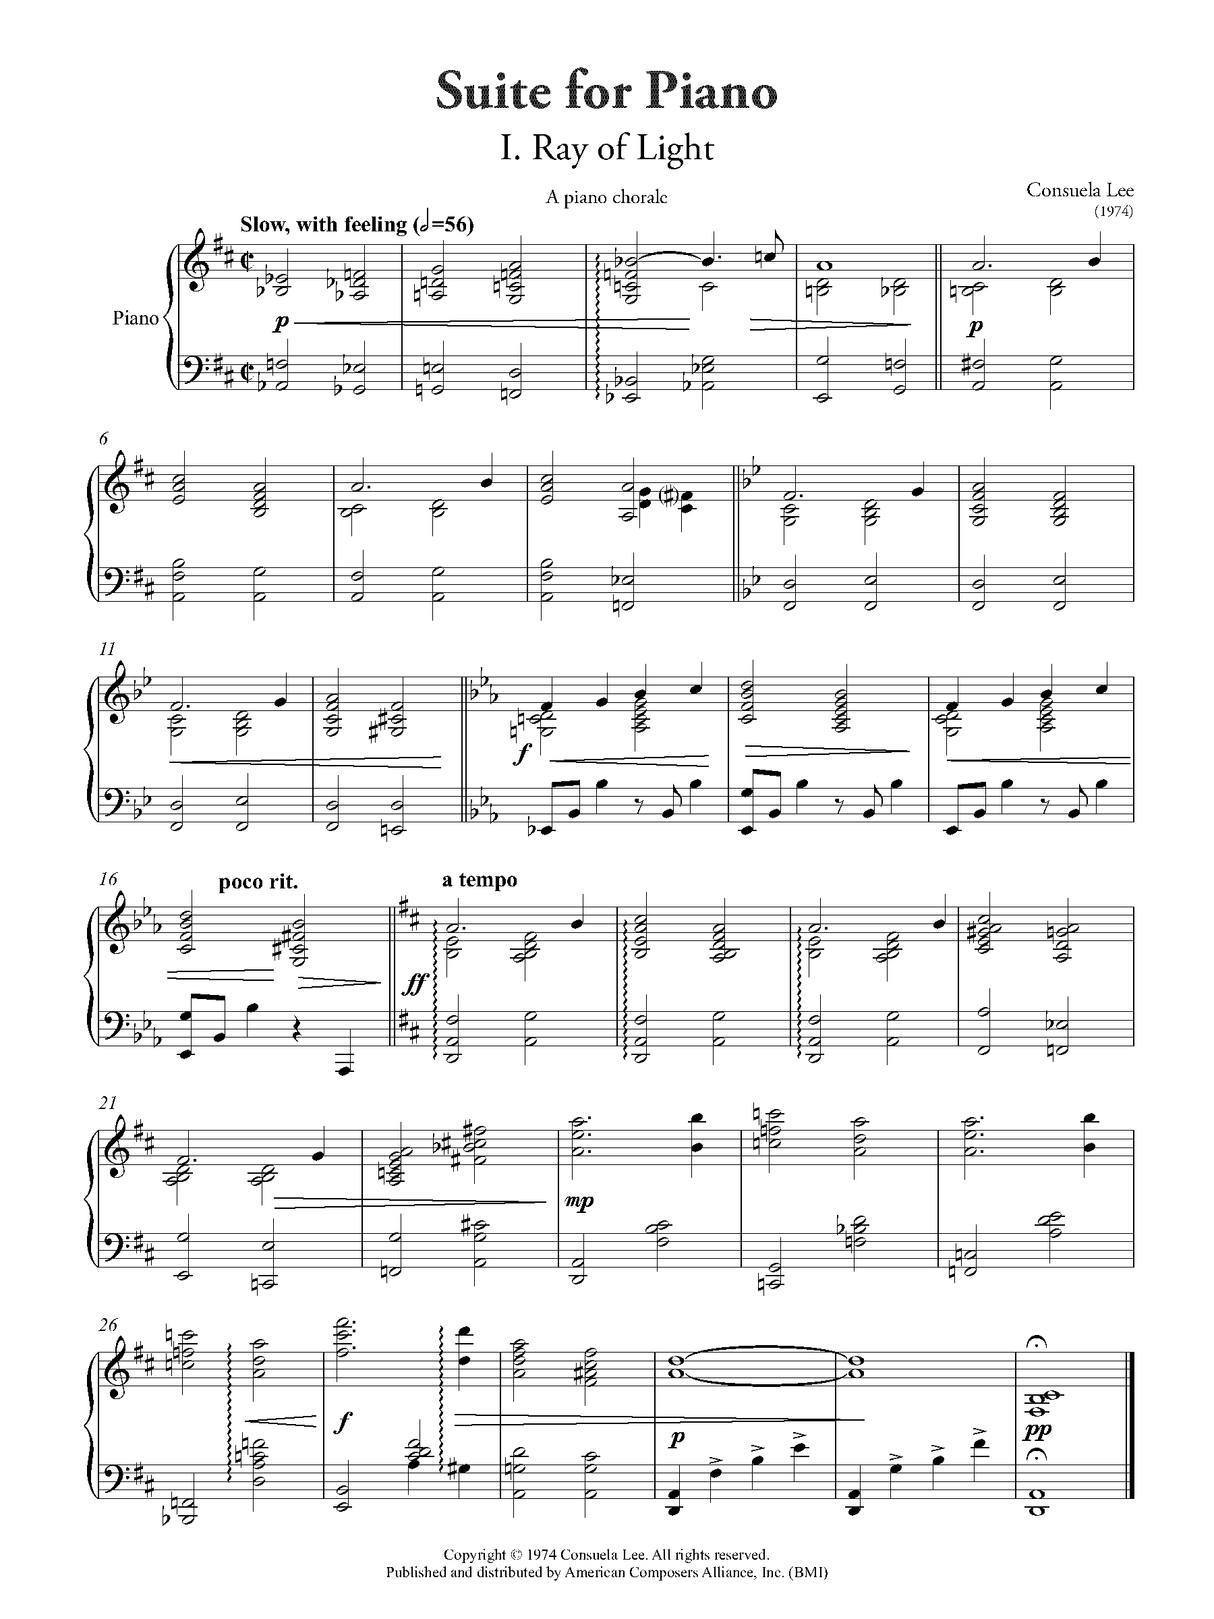 Lee: Suite for Piano